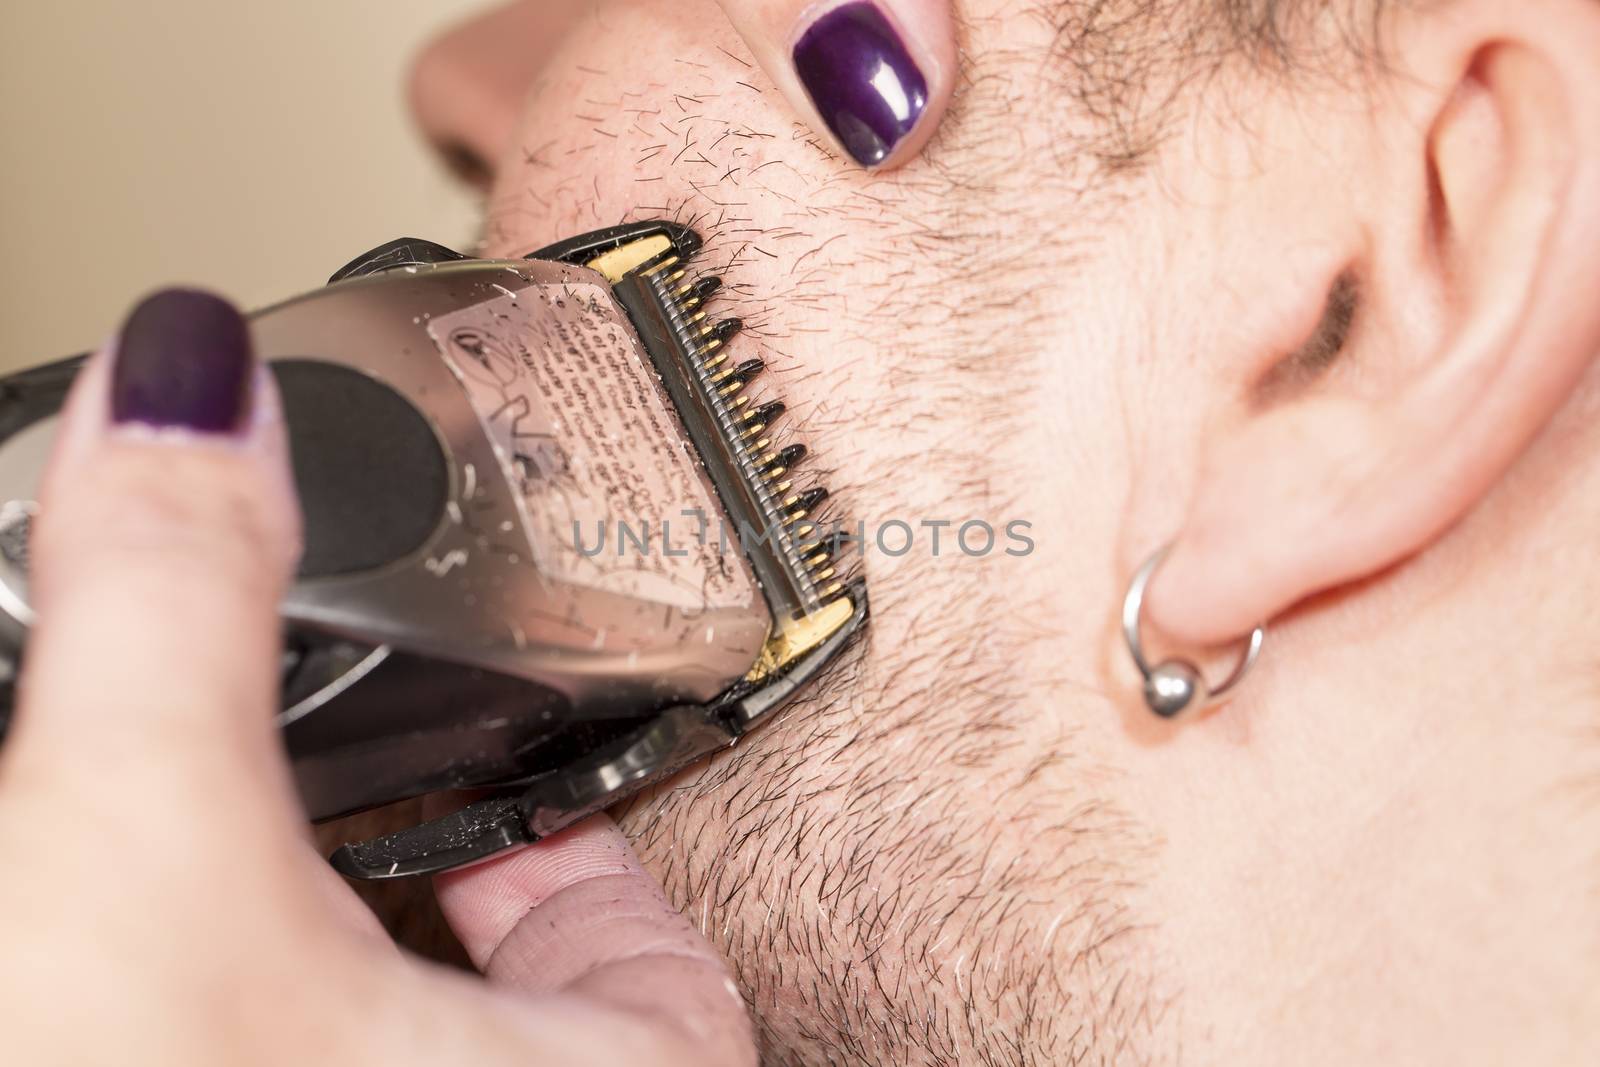 Hairdresser, cutting beard of his customer with scissors and shave in the salon